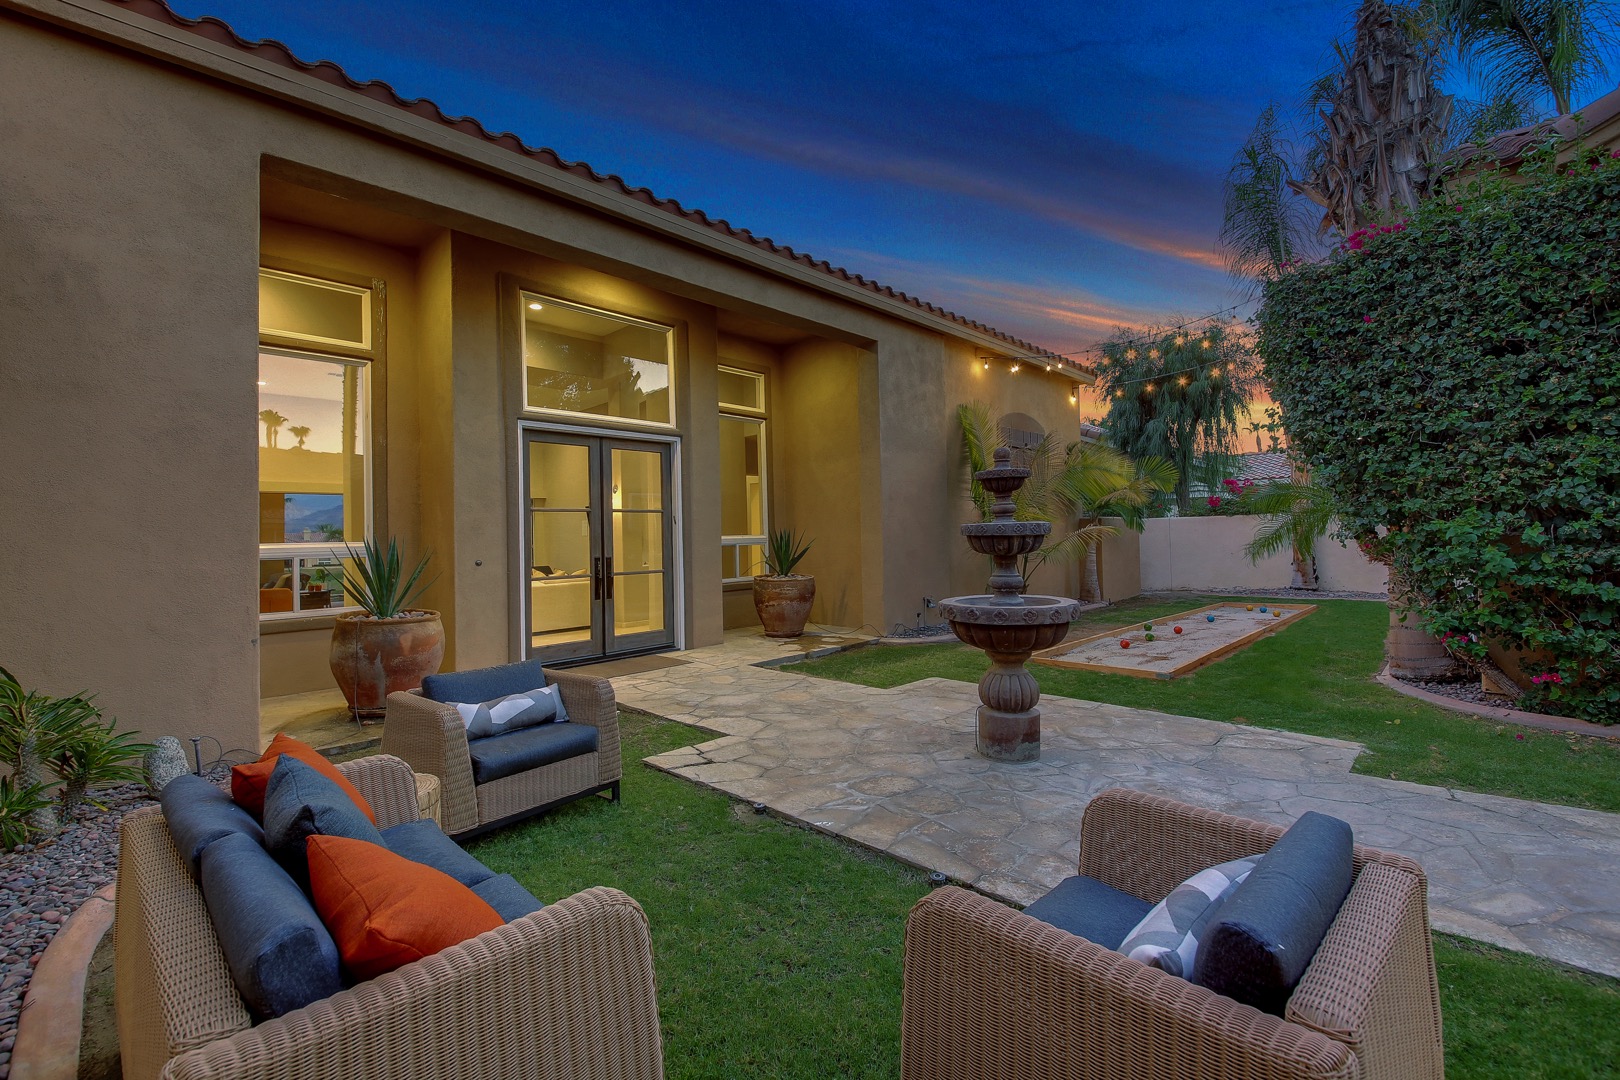 Need some space? Head out to the completely private courtyard which features a Bocce court and comfortable patio furniture.